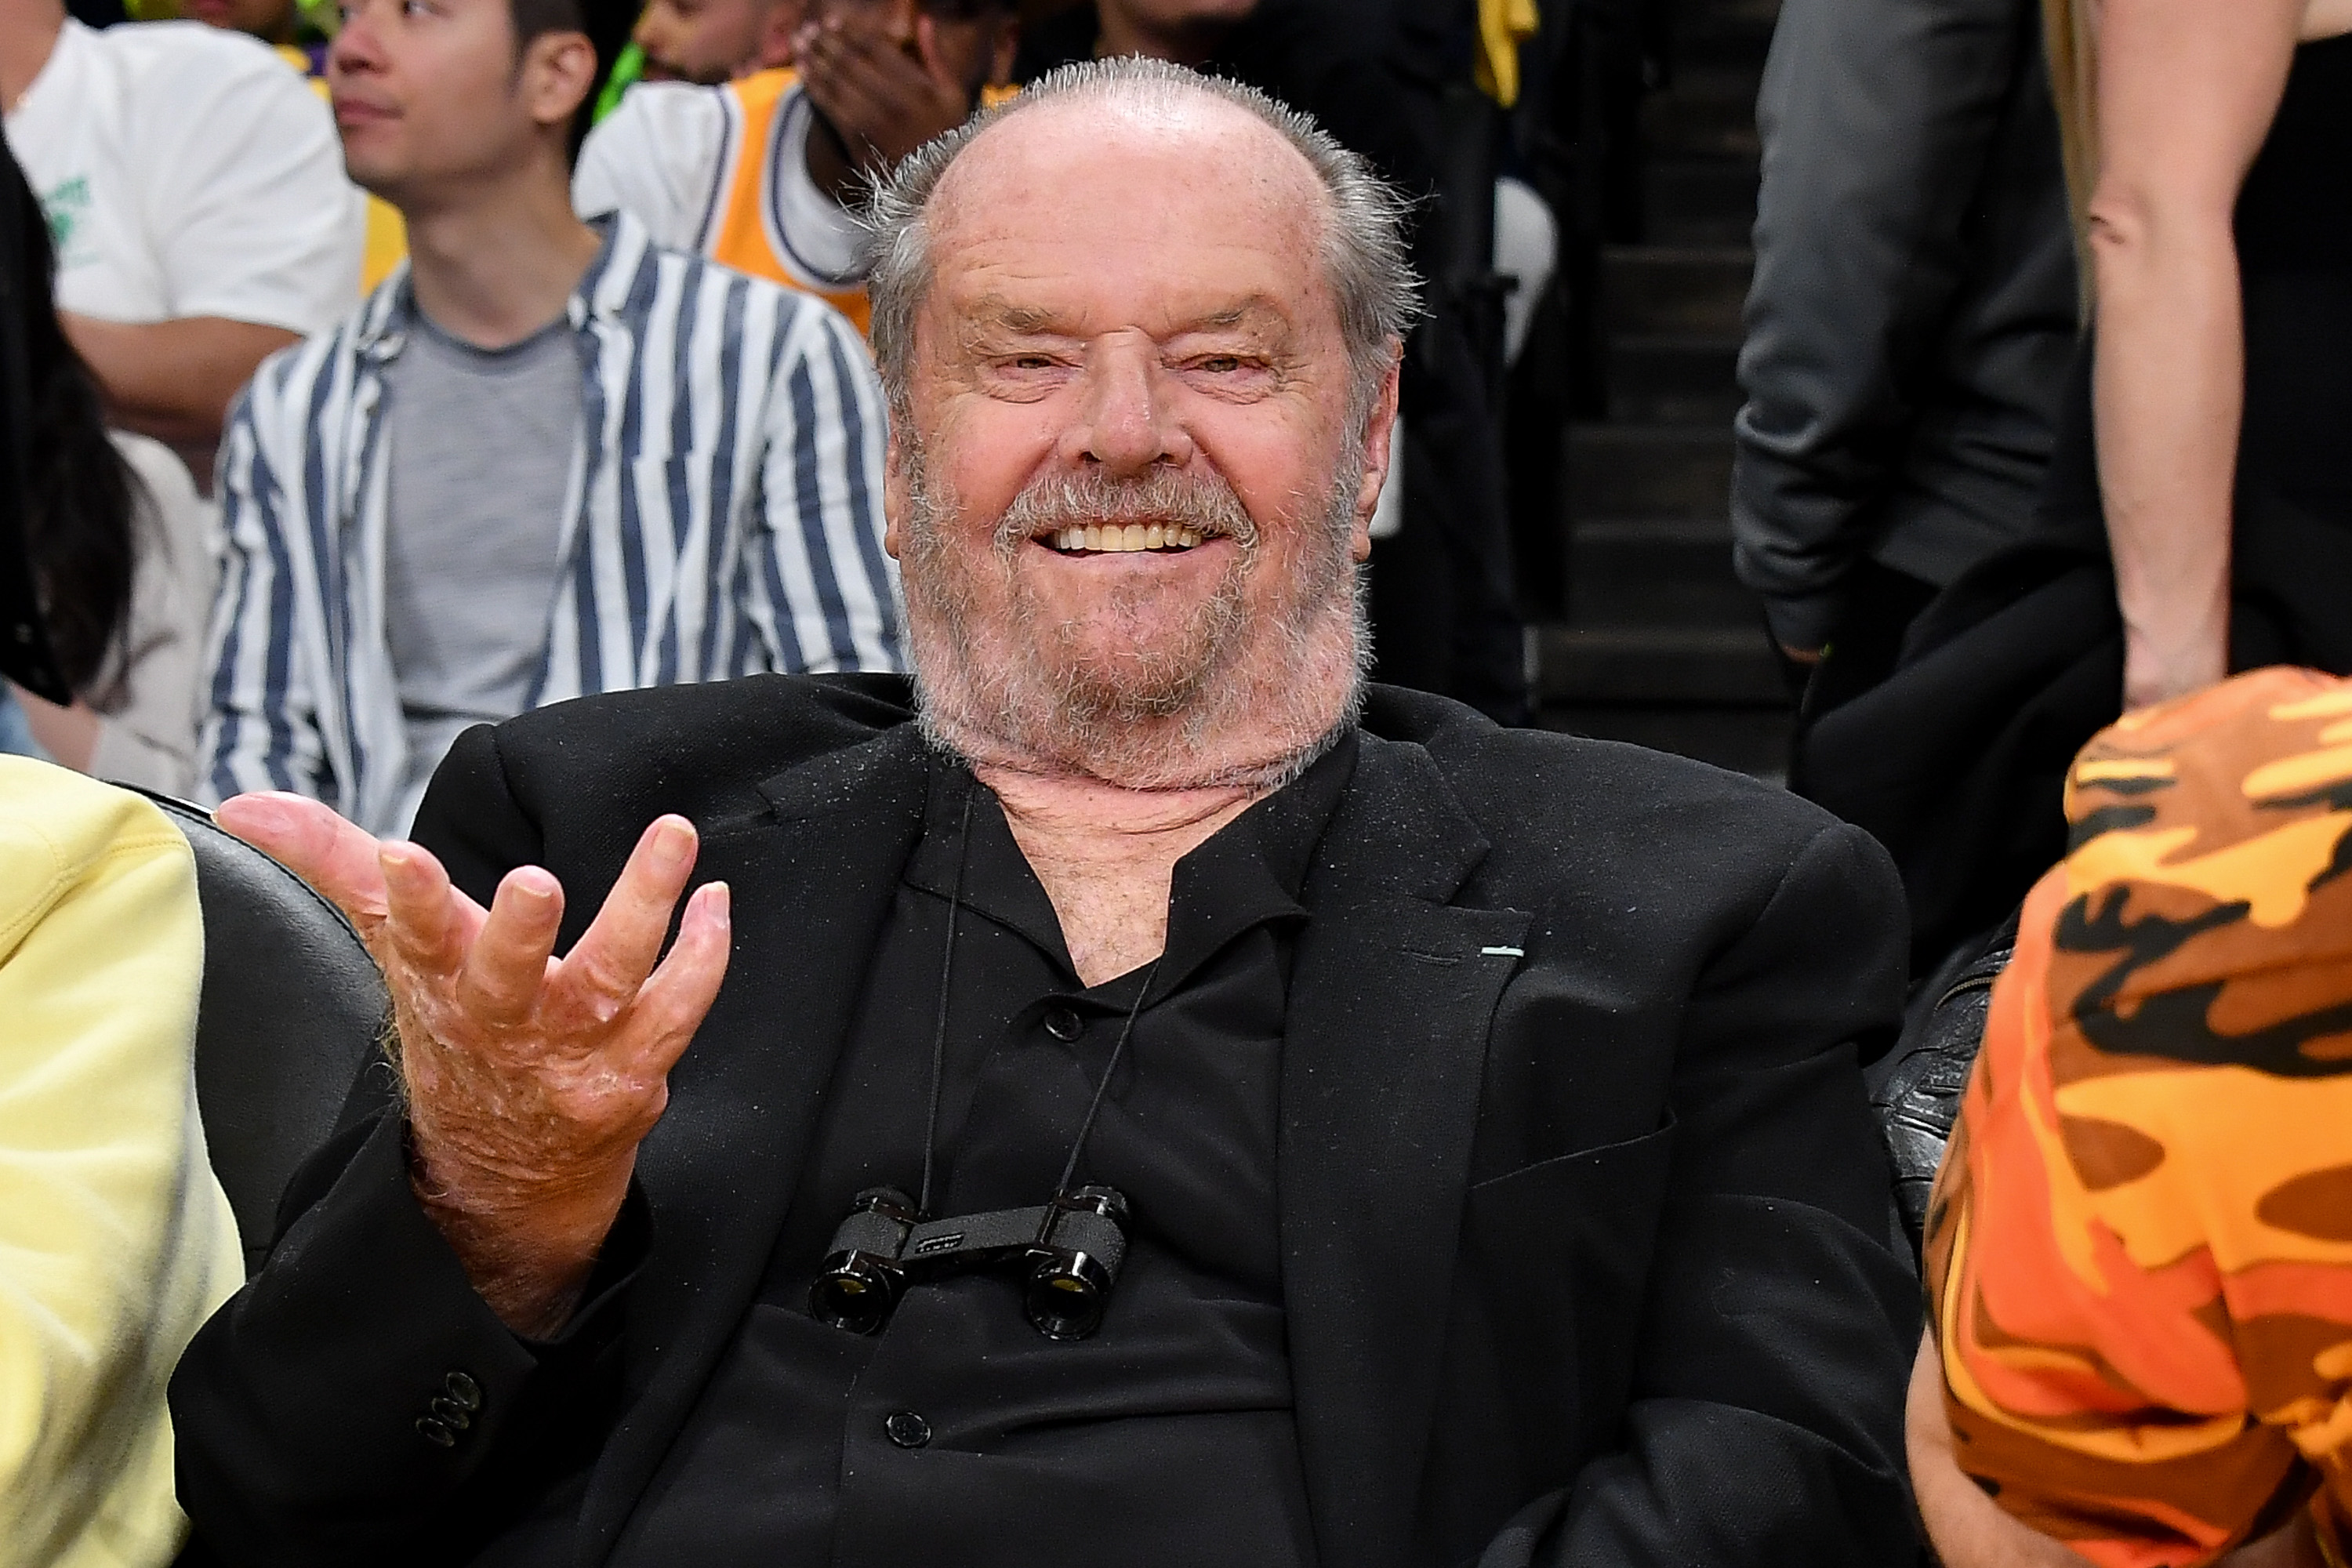 Jack Nicholson at a basketball game on May 8, 2023 in Los Angeles, California. | Source: Getty Images